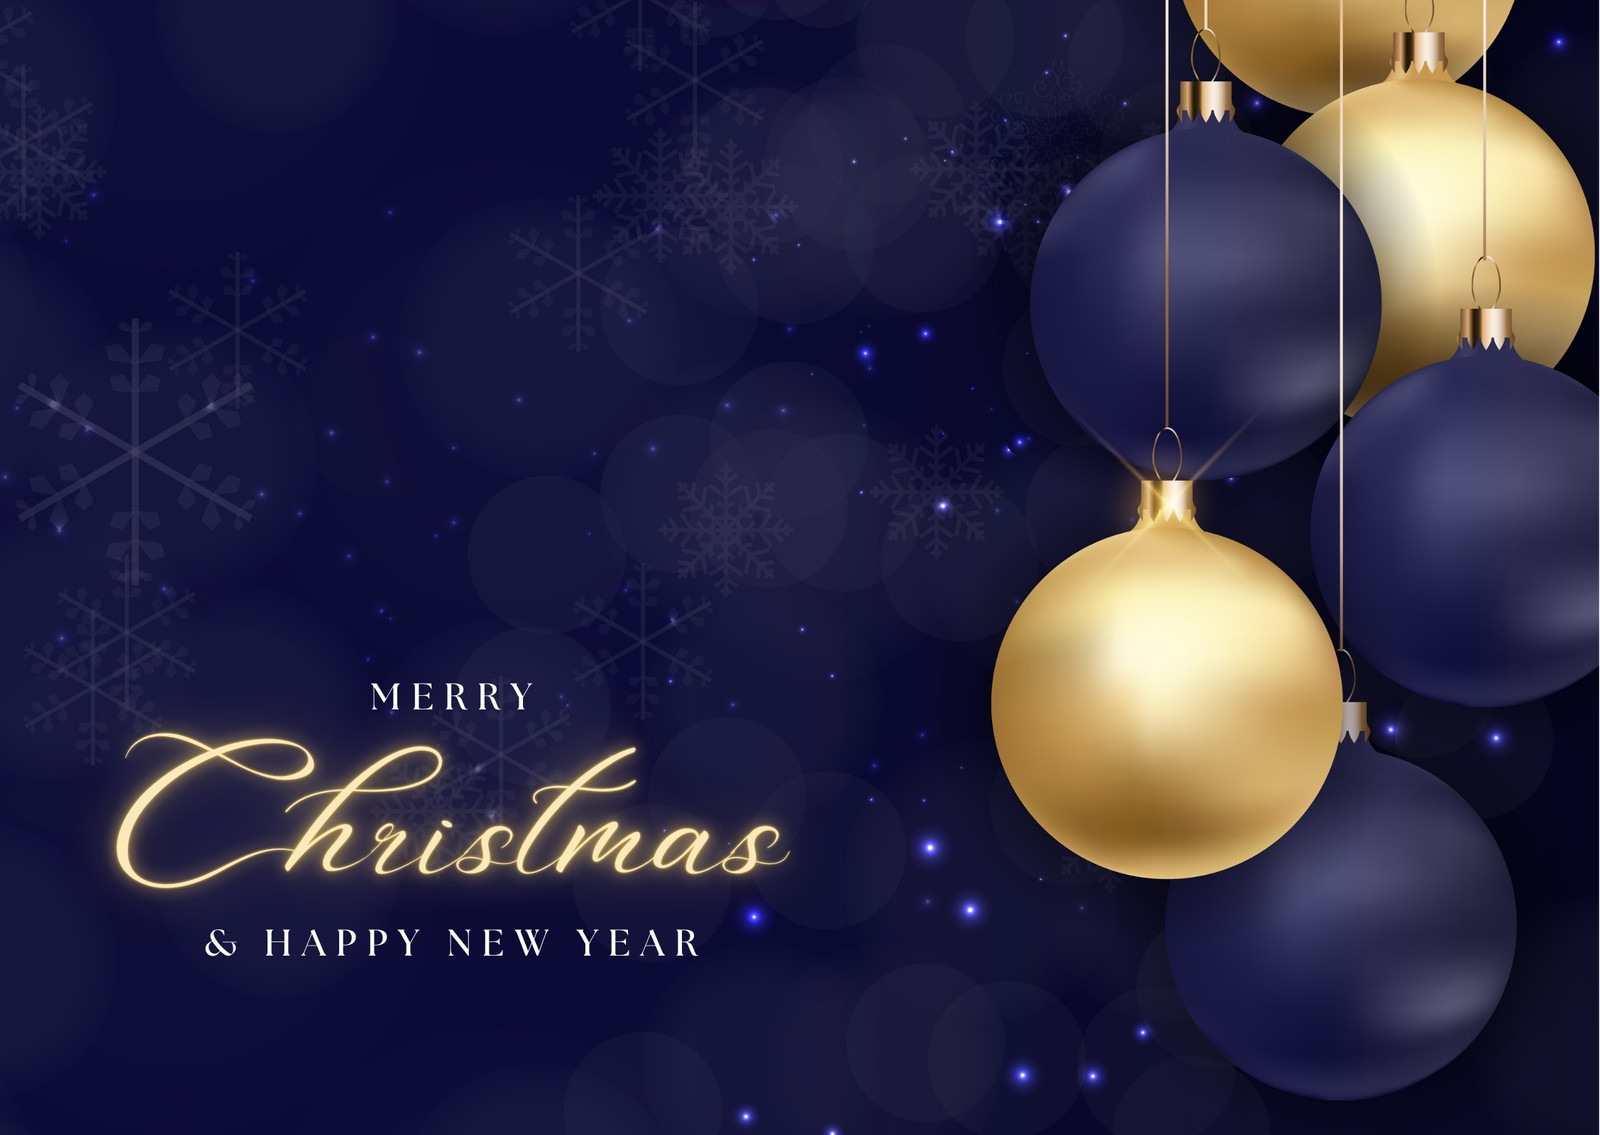 Dark Blue Exciting Merry Christmas and Happy New Year Card